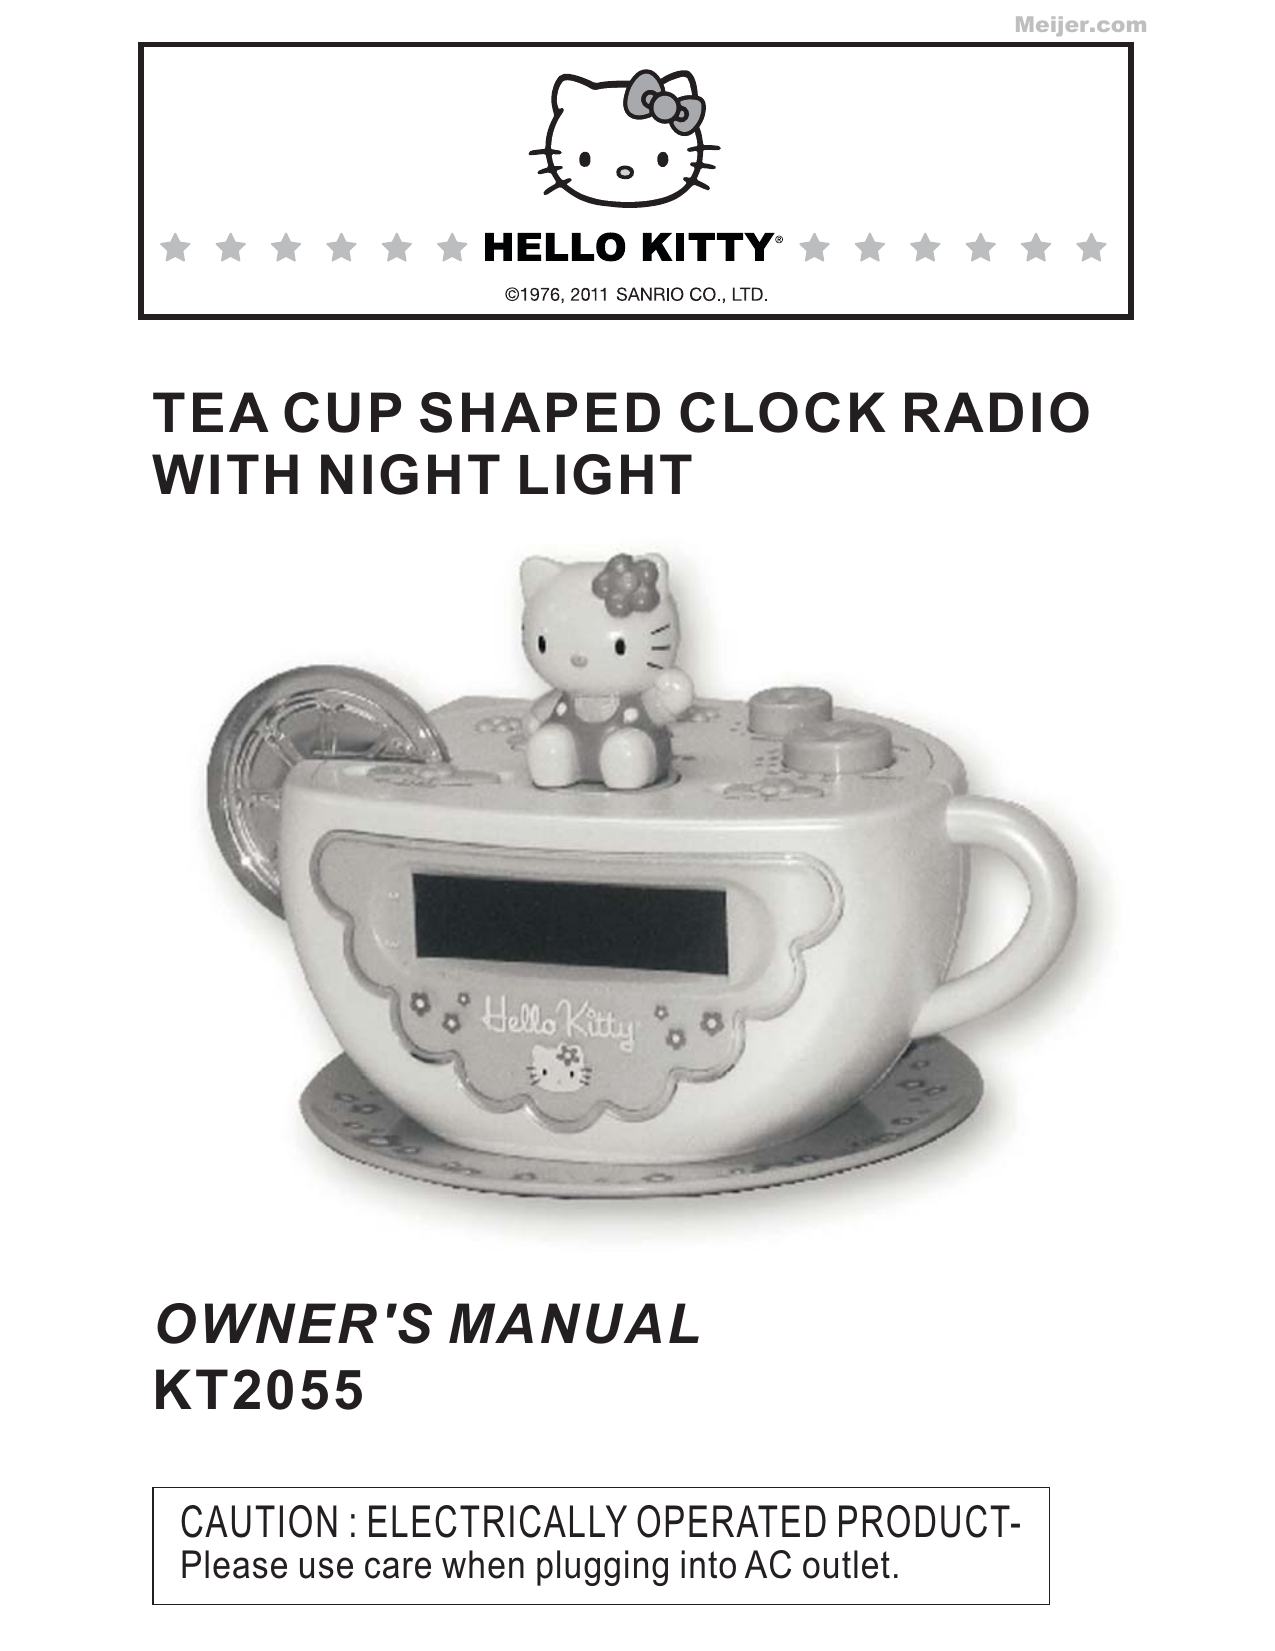 Hello Kitty KT2055 Owner's Manual | Manualzz